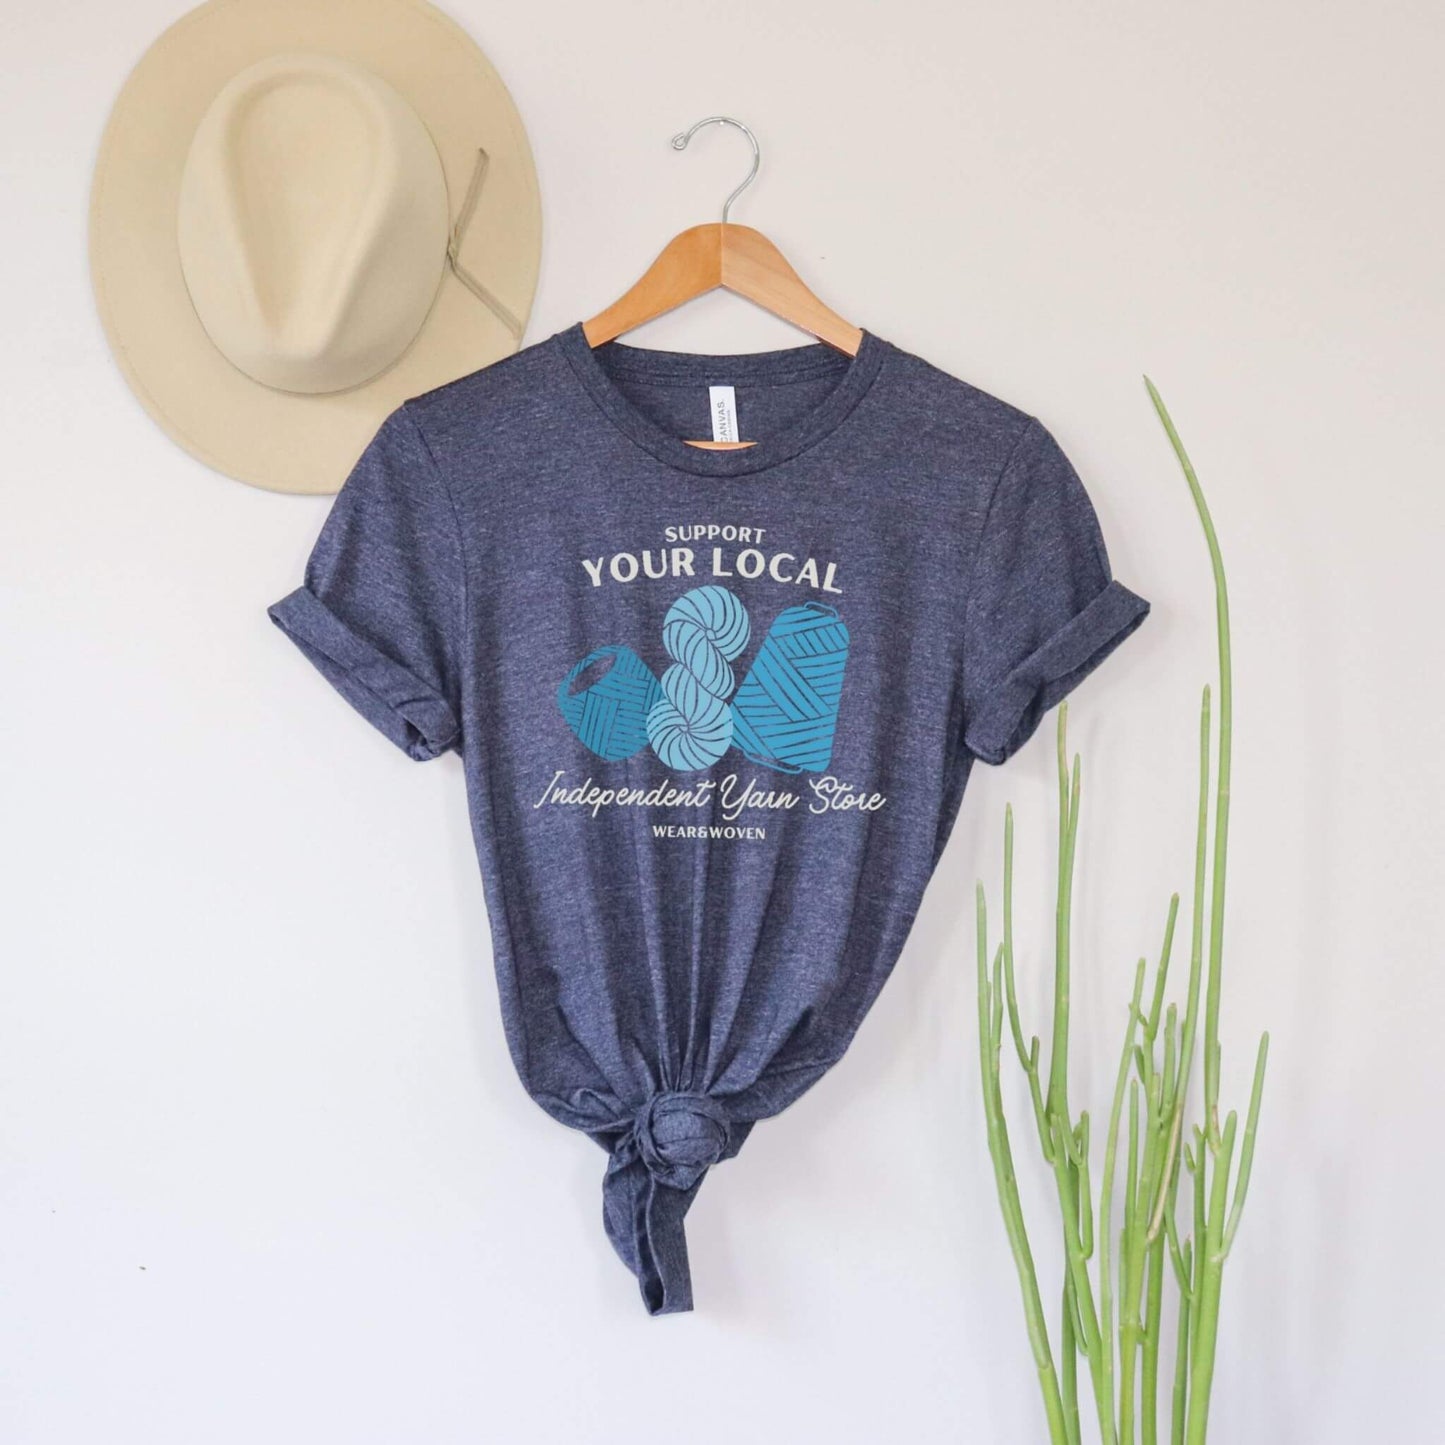 support your local independent yarn store dark heather blue t-shirt. shirt has three images of yarn in different shades of blue